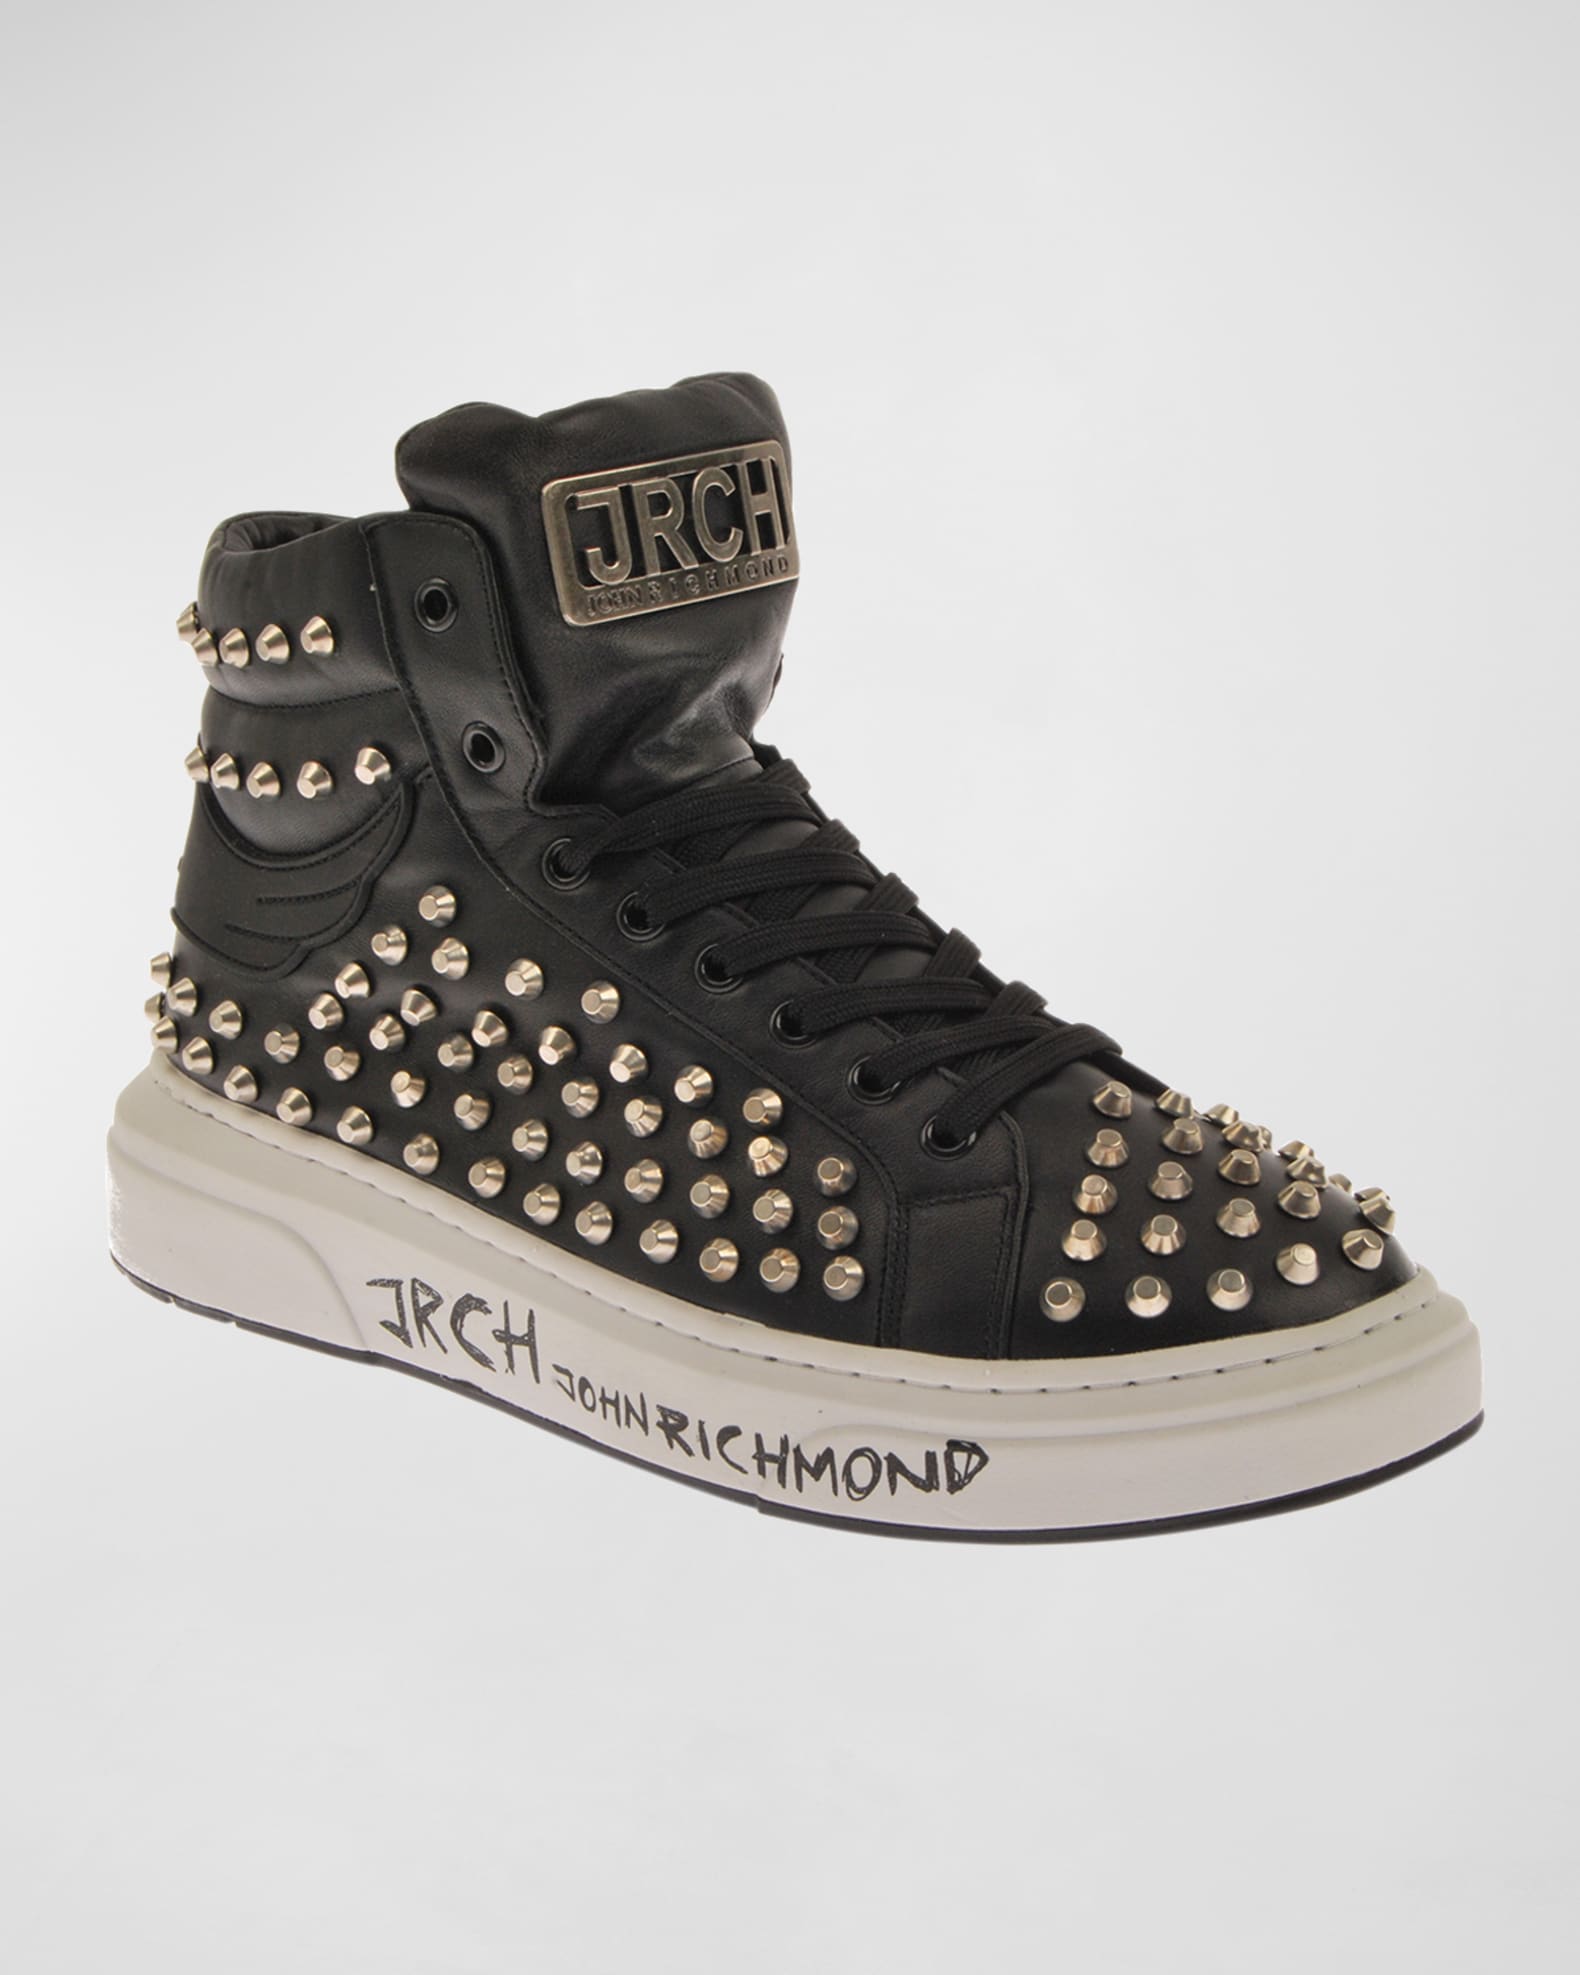 Philipp Plein Spike-Studded Leather High-Top Sneakers in Black for